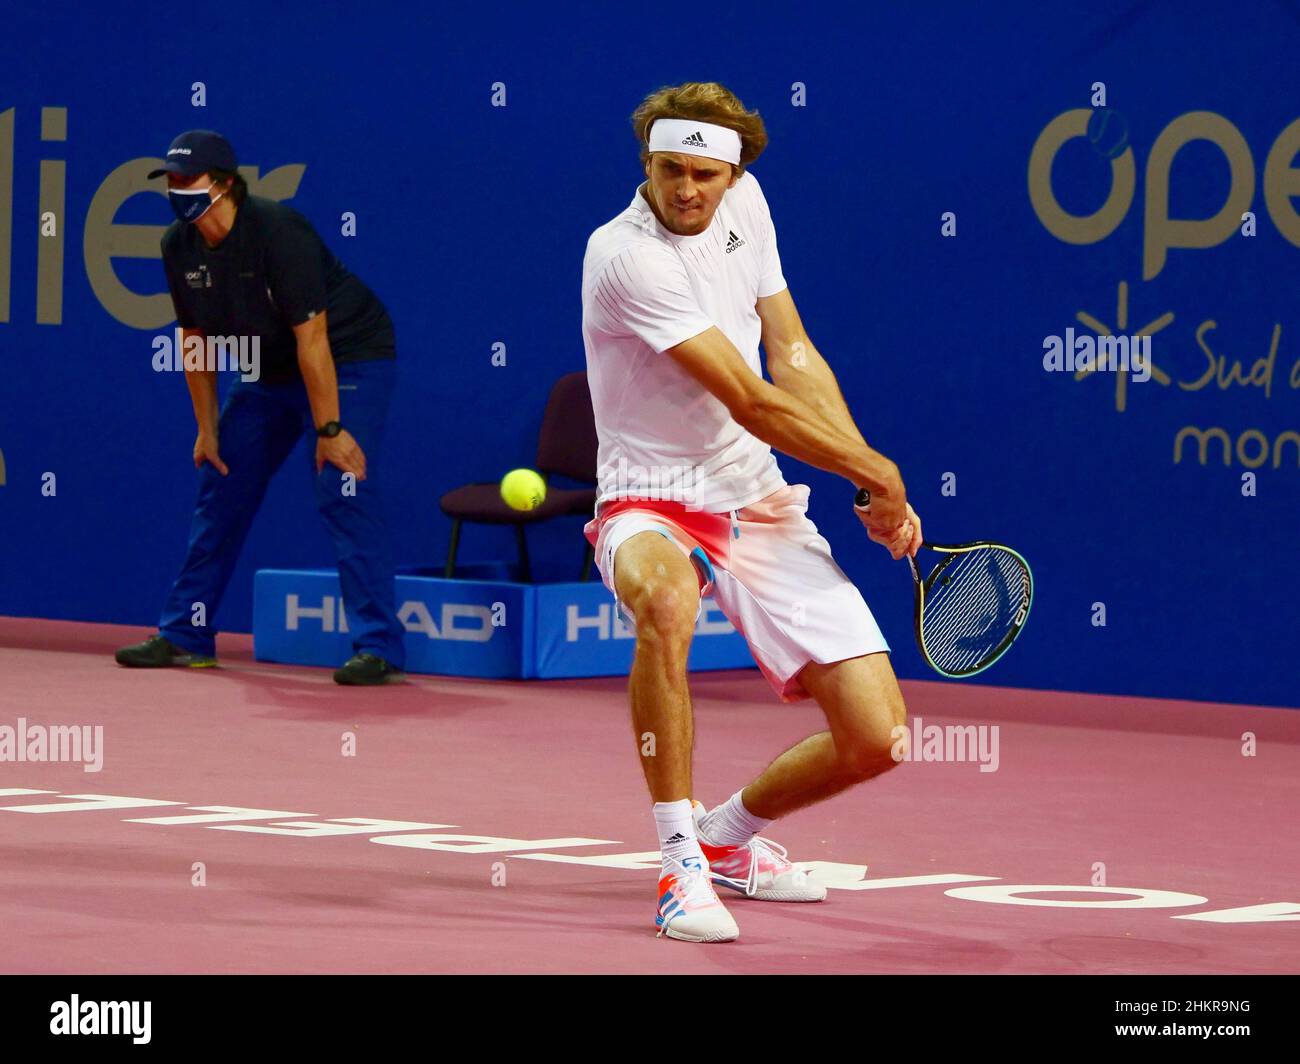 Alexander Zverev of Germany in action against Mikael Ymer of Sweden during the semi-finals at the Open Sud de France 2022, ATP 250 tennis tournament on February 5, 2022 at Sud de